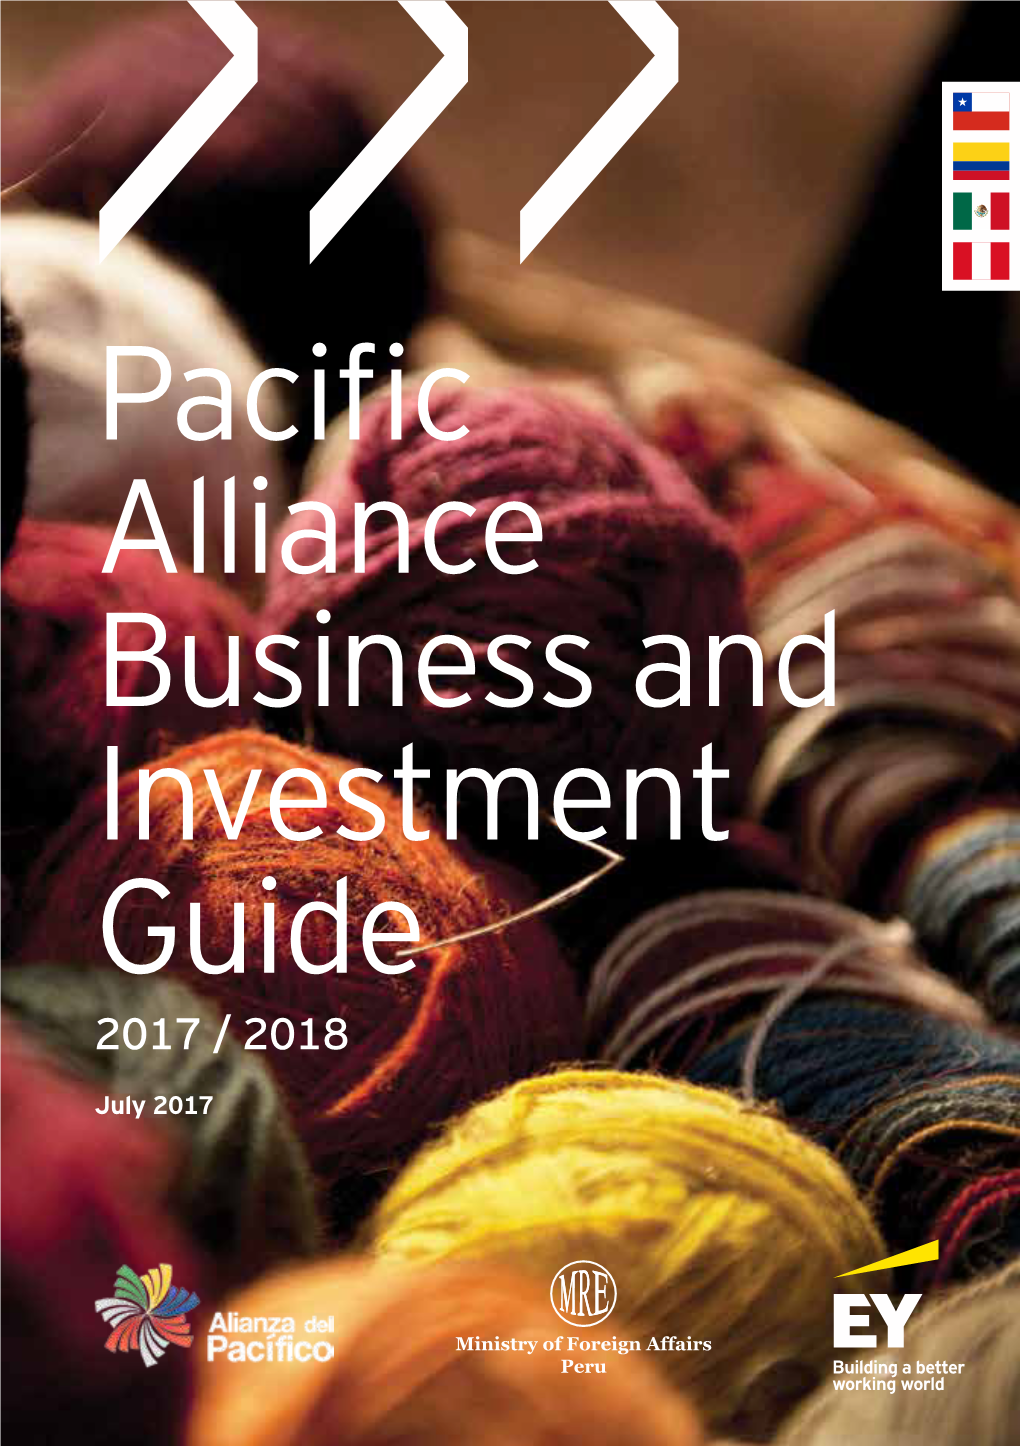 Pacific Alliance Business and Investment Guide 2017 / 2018